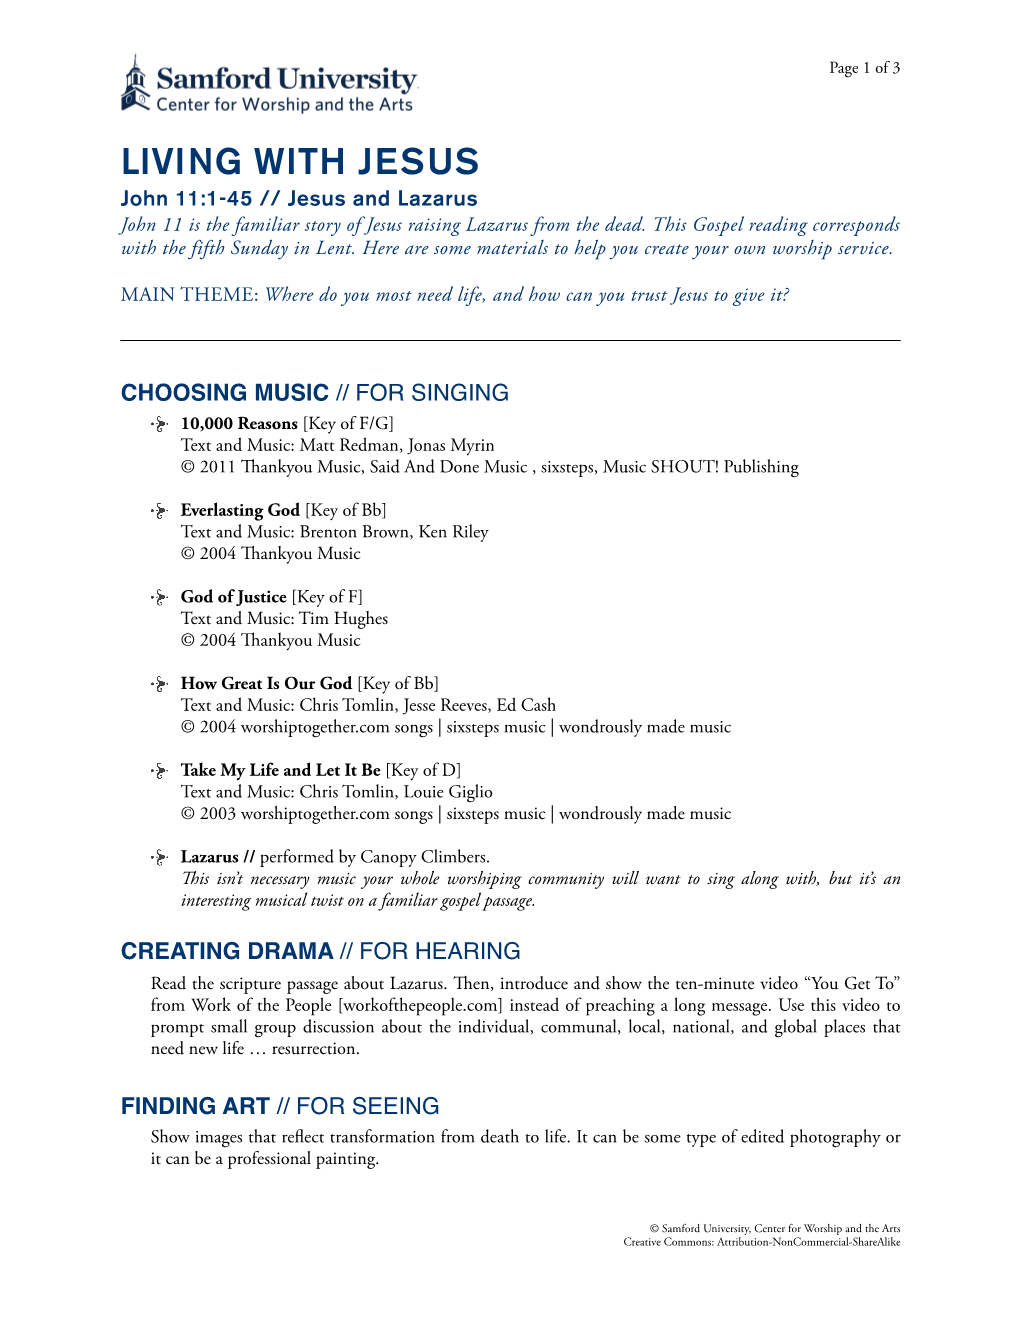 LIVING with JESUS John 11:1-45 // Jesus and Lazarus John 11 Is the Familiar Story of Jesus Raising Lazarus from the Dead